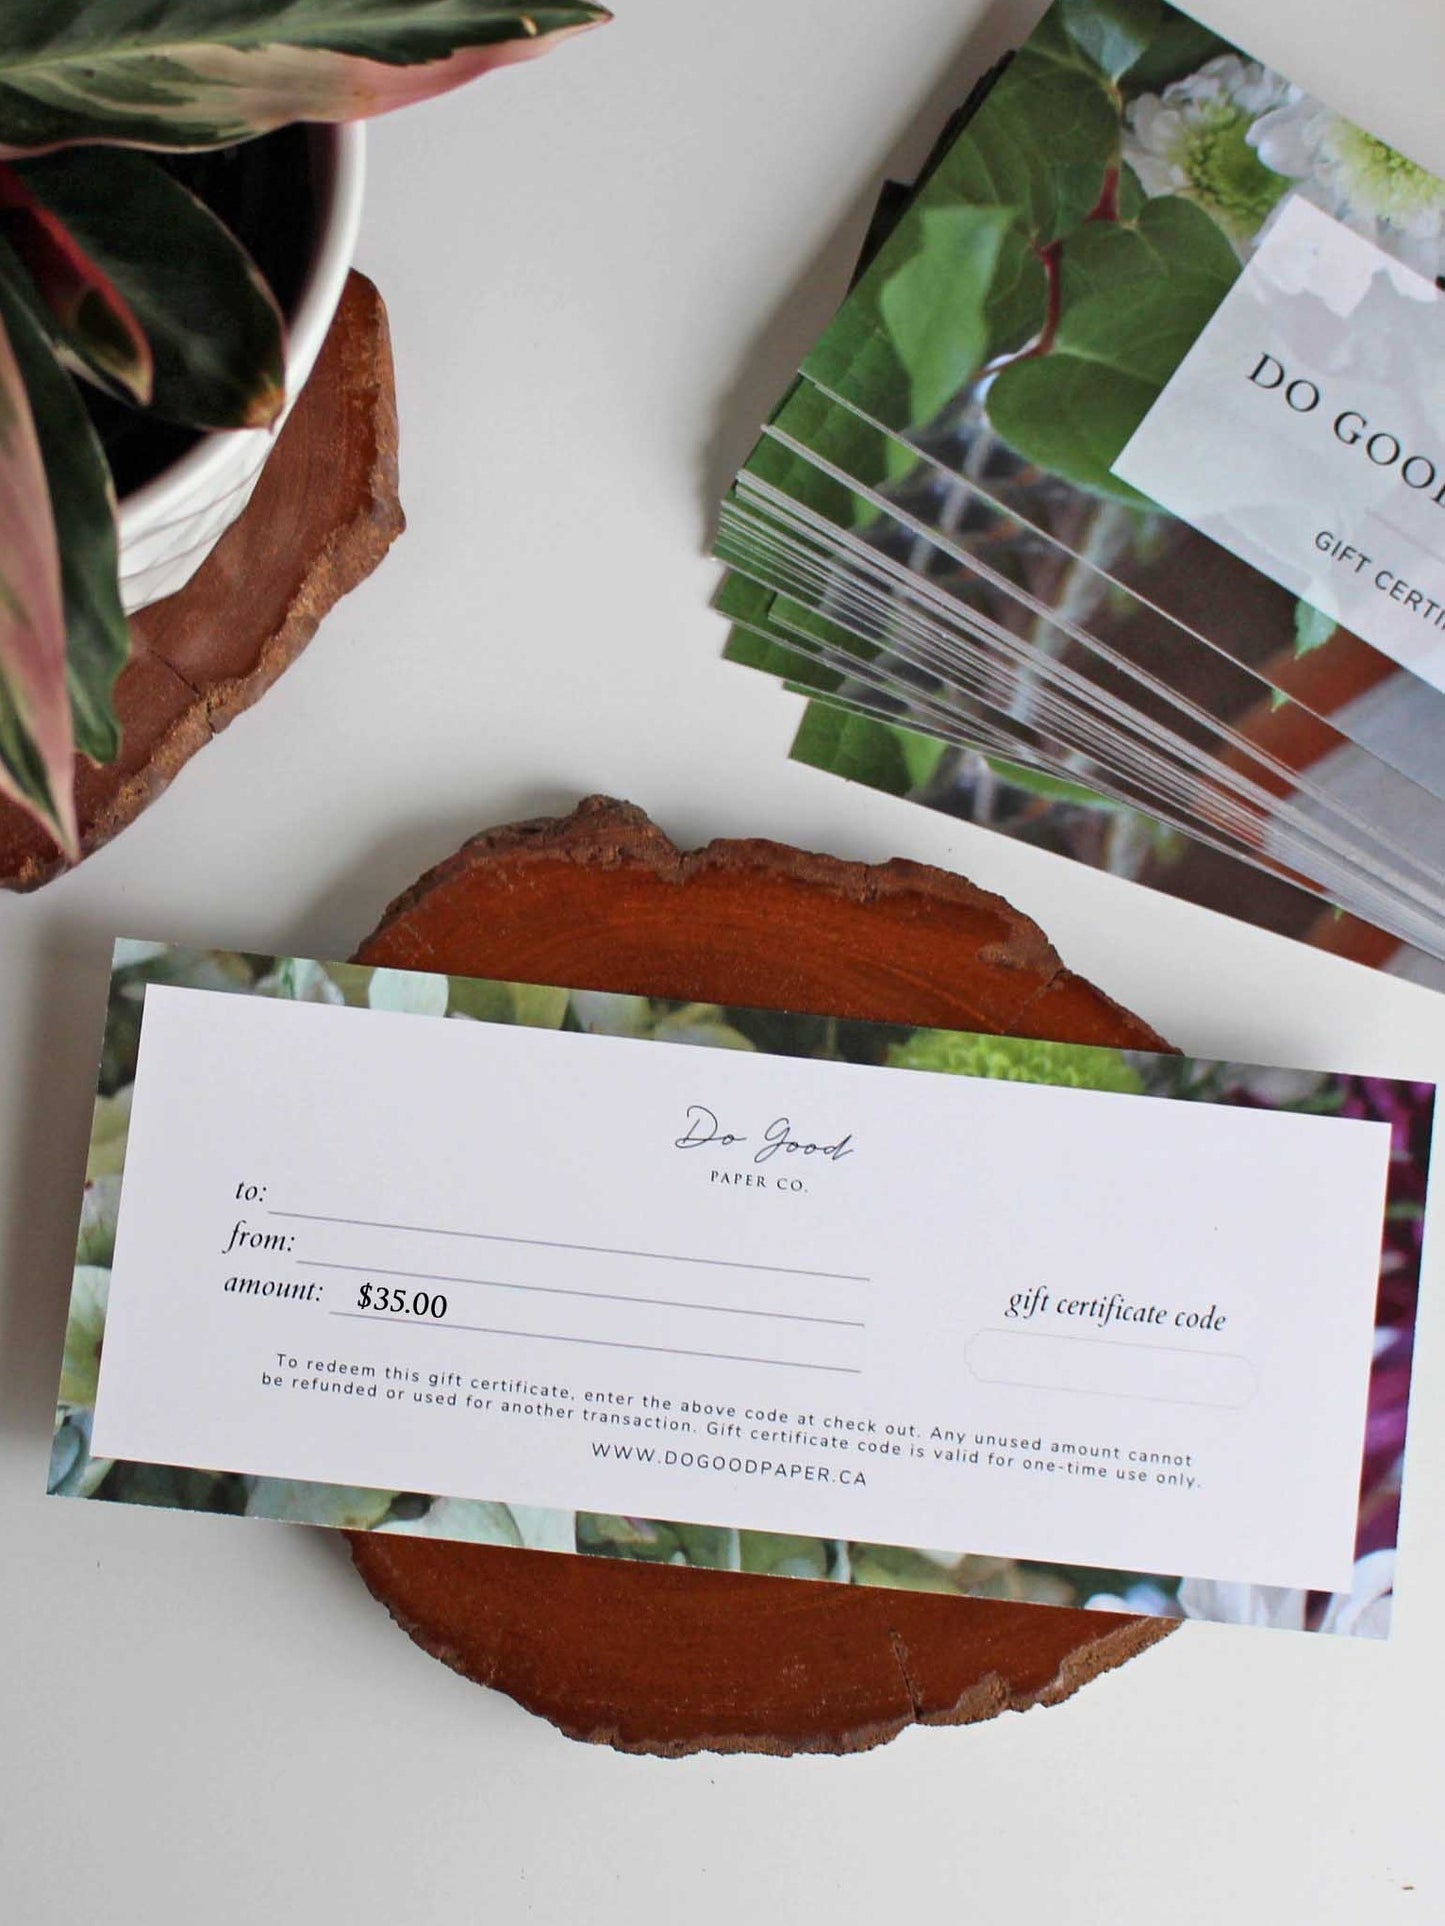 Do Good Paper Co. gift certificate - Thirty-five dollars ($35) for paper stationery goods